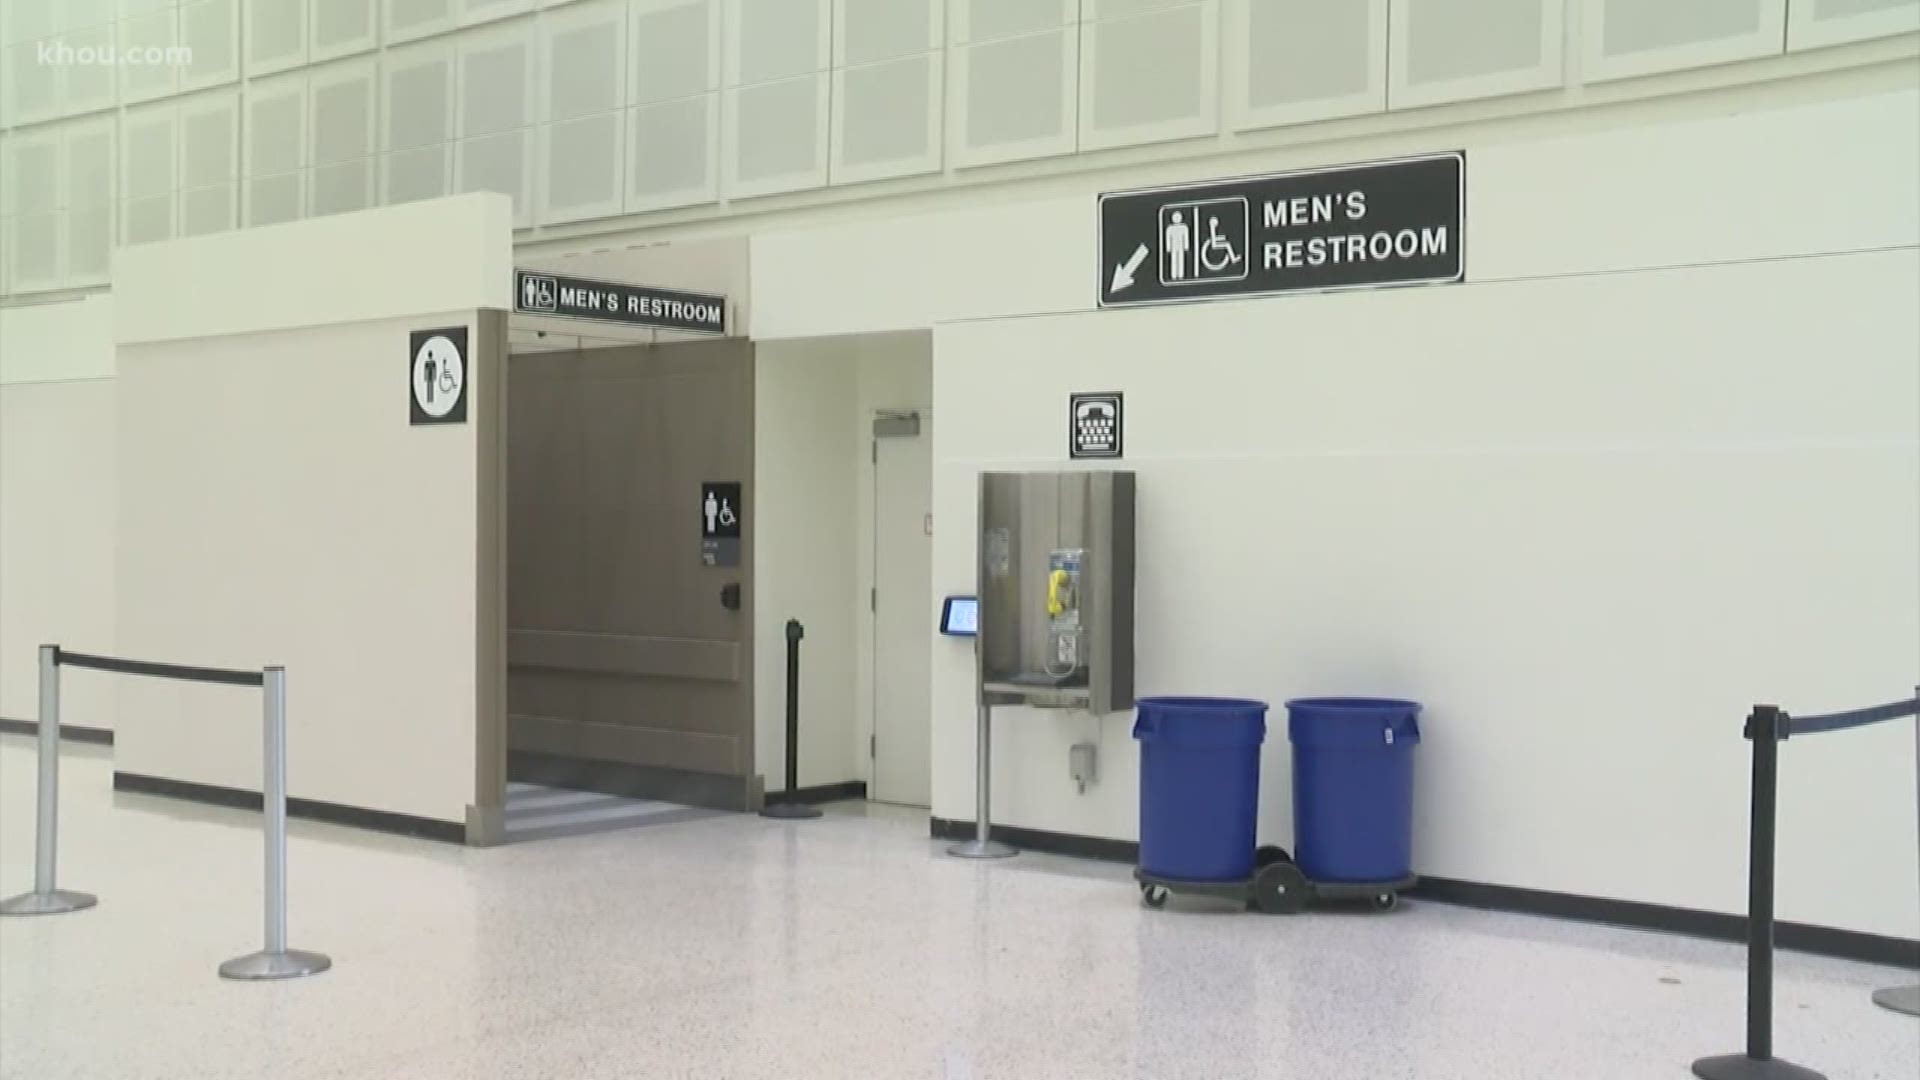 The water pressure returned to normal but people at the airport had to deal with closed restrooms and restaurants during the hours-long problem.